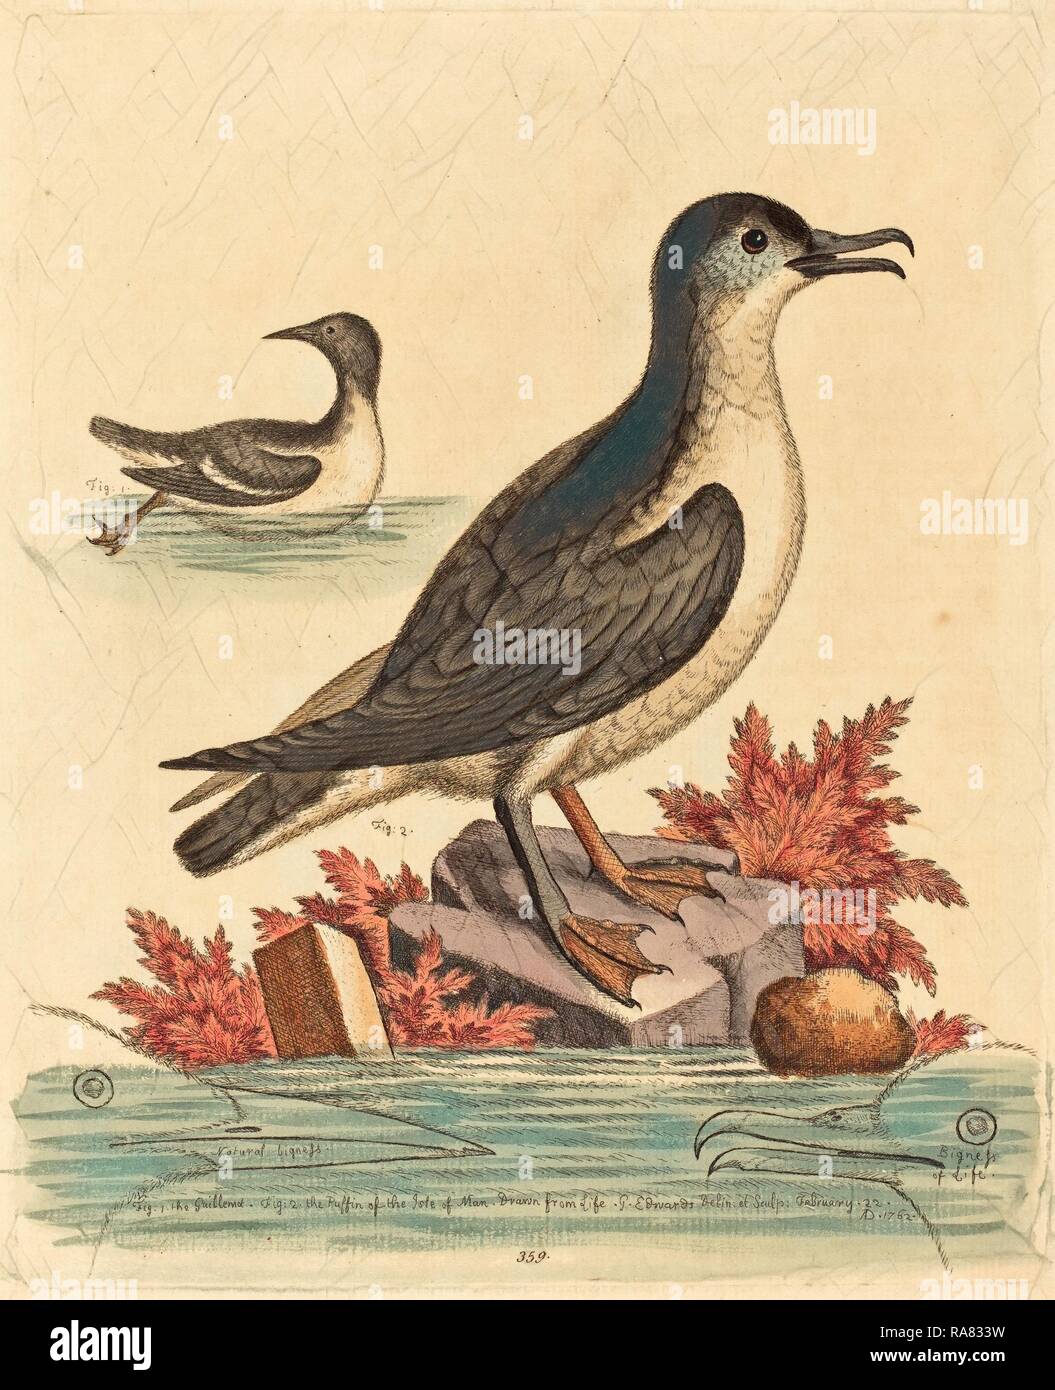 George Edwards (English, 1694 - 1773), The Guillemot and the Puffin of the Isle of Man, 1762, hand-colored etching reimagined Stock Photo